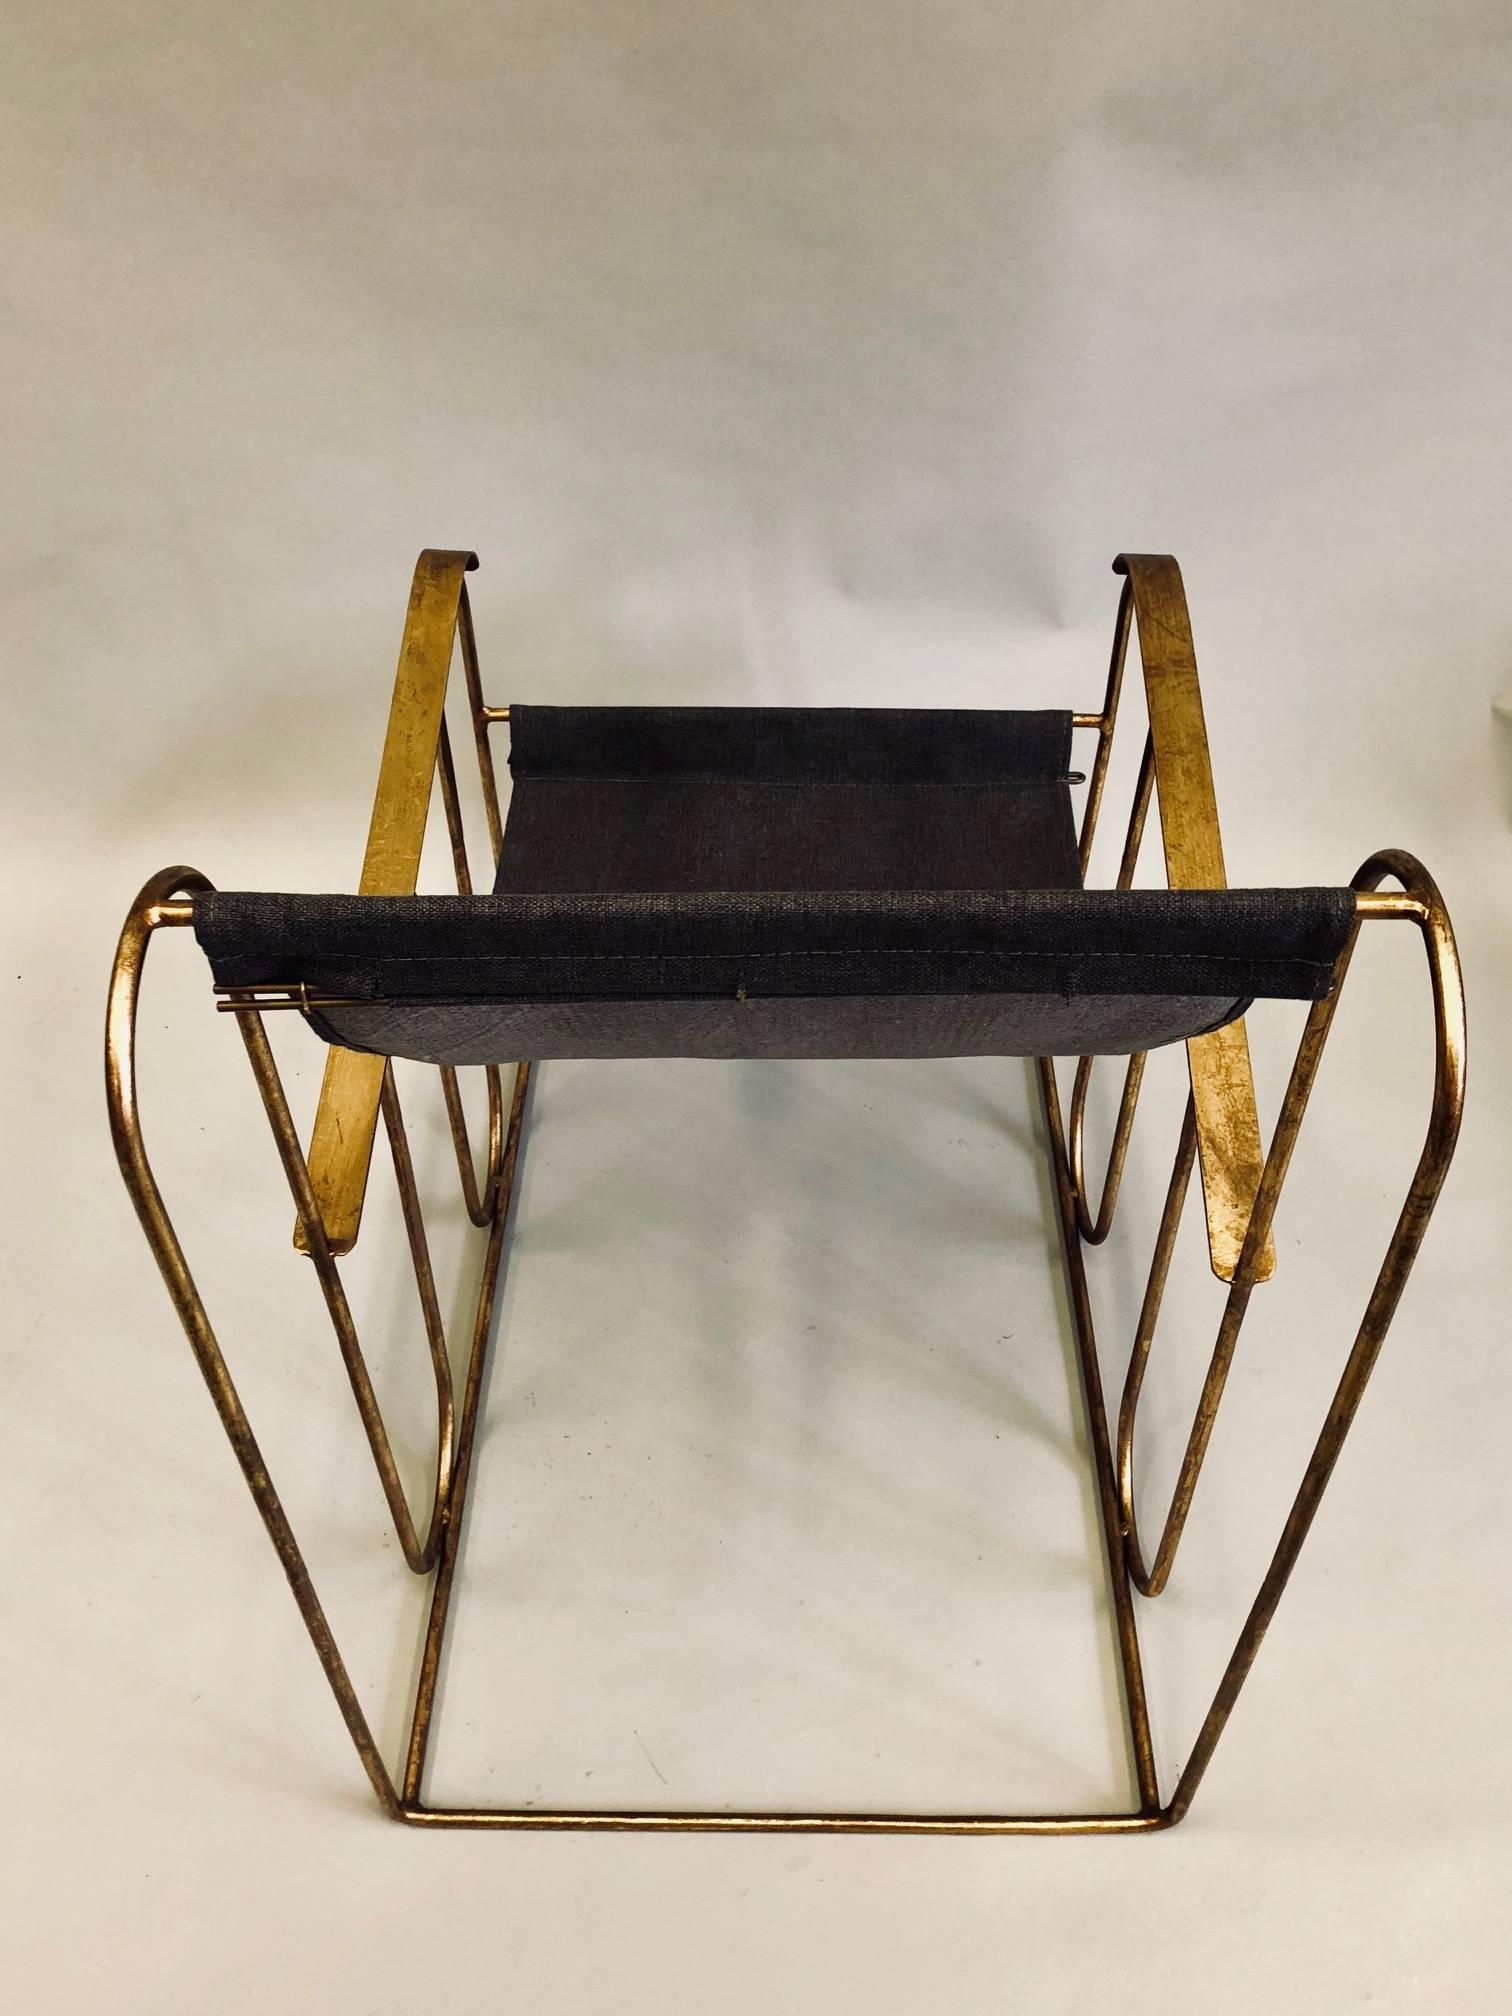 20th Century Pair of French Mid-Century Modern Gilt Iron Lounge Chairs, Jean Royere